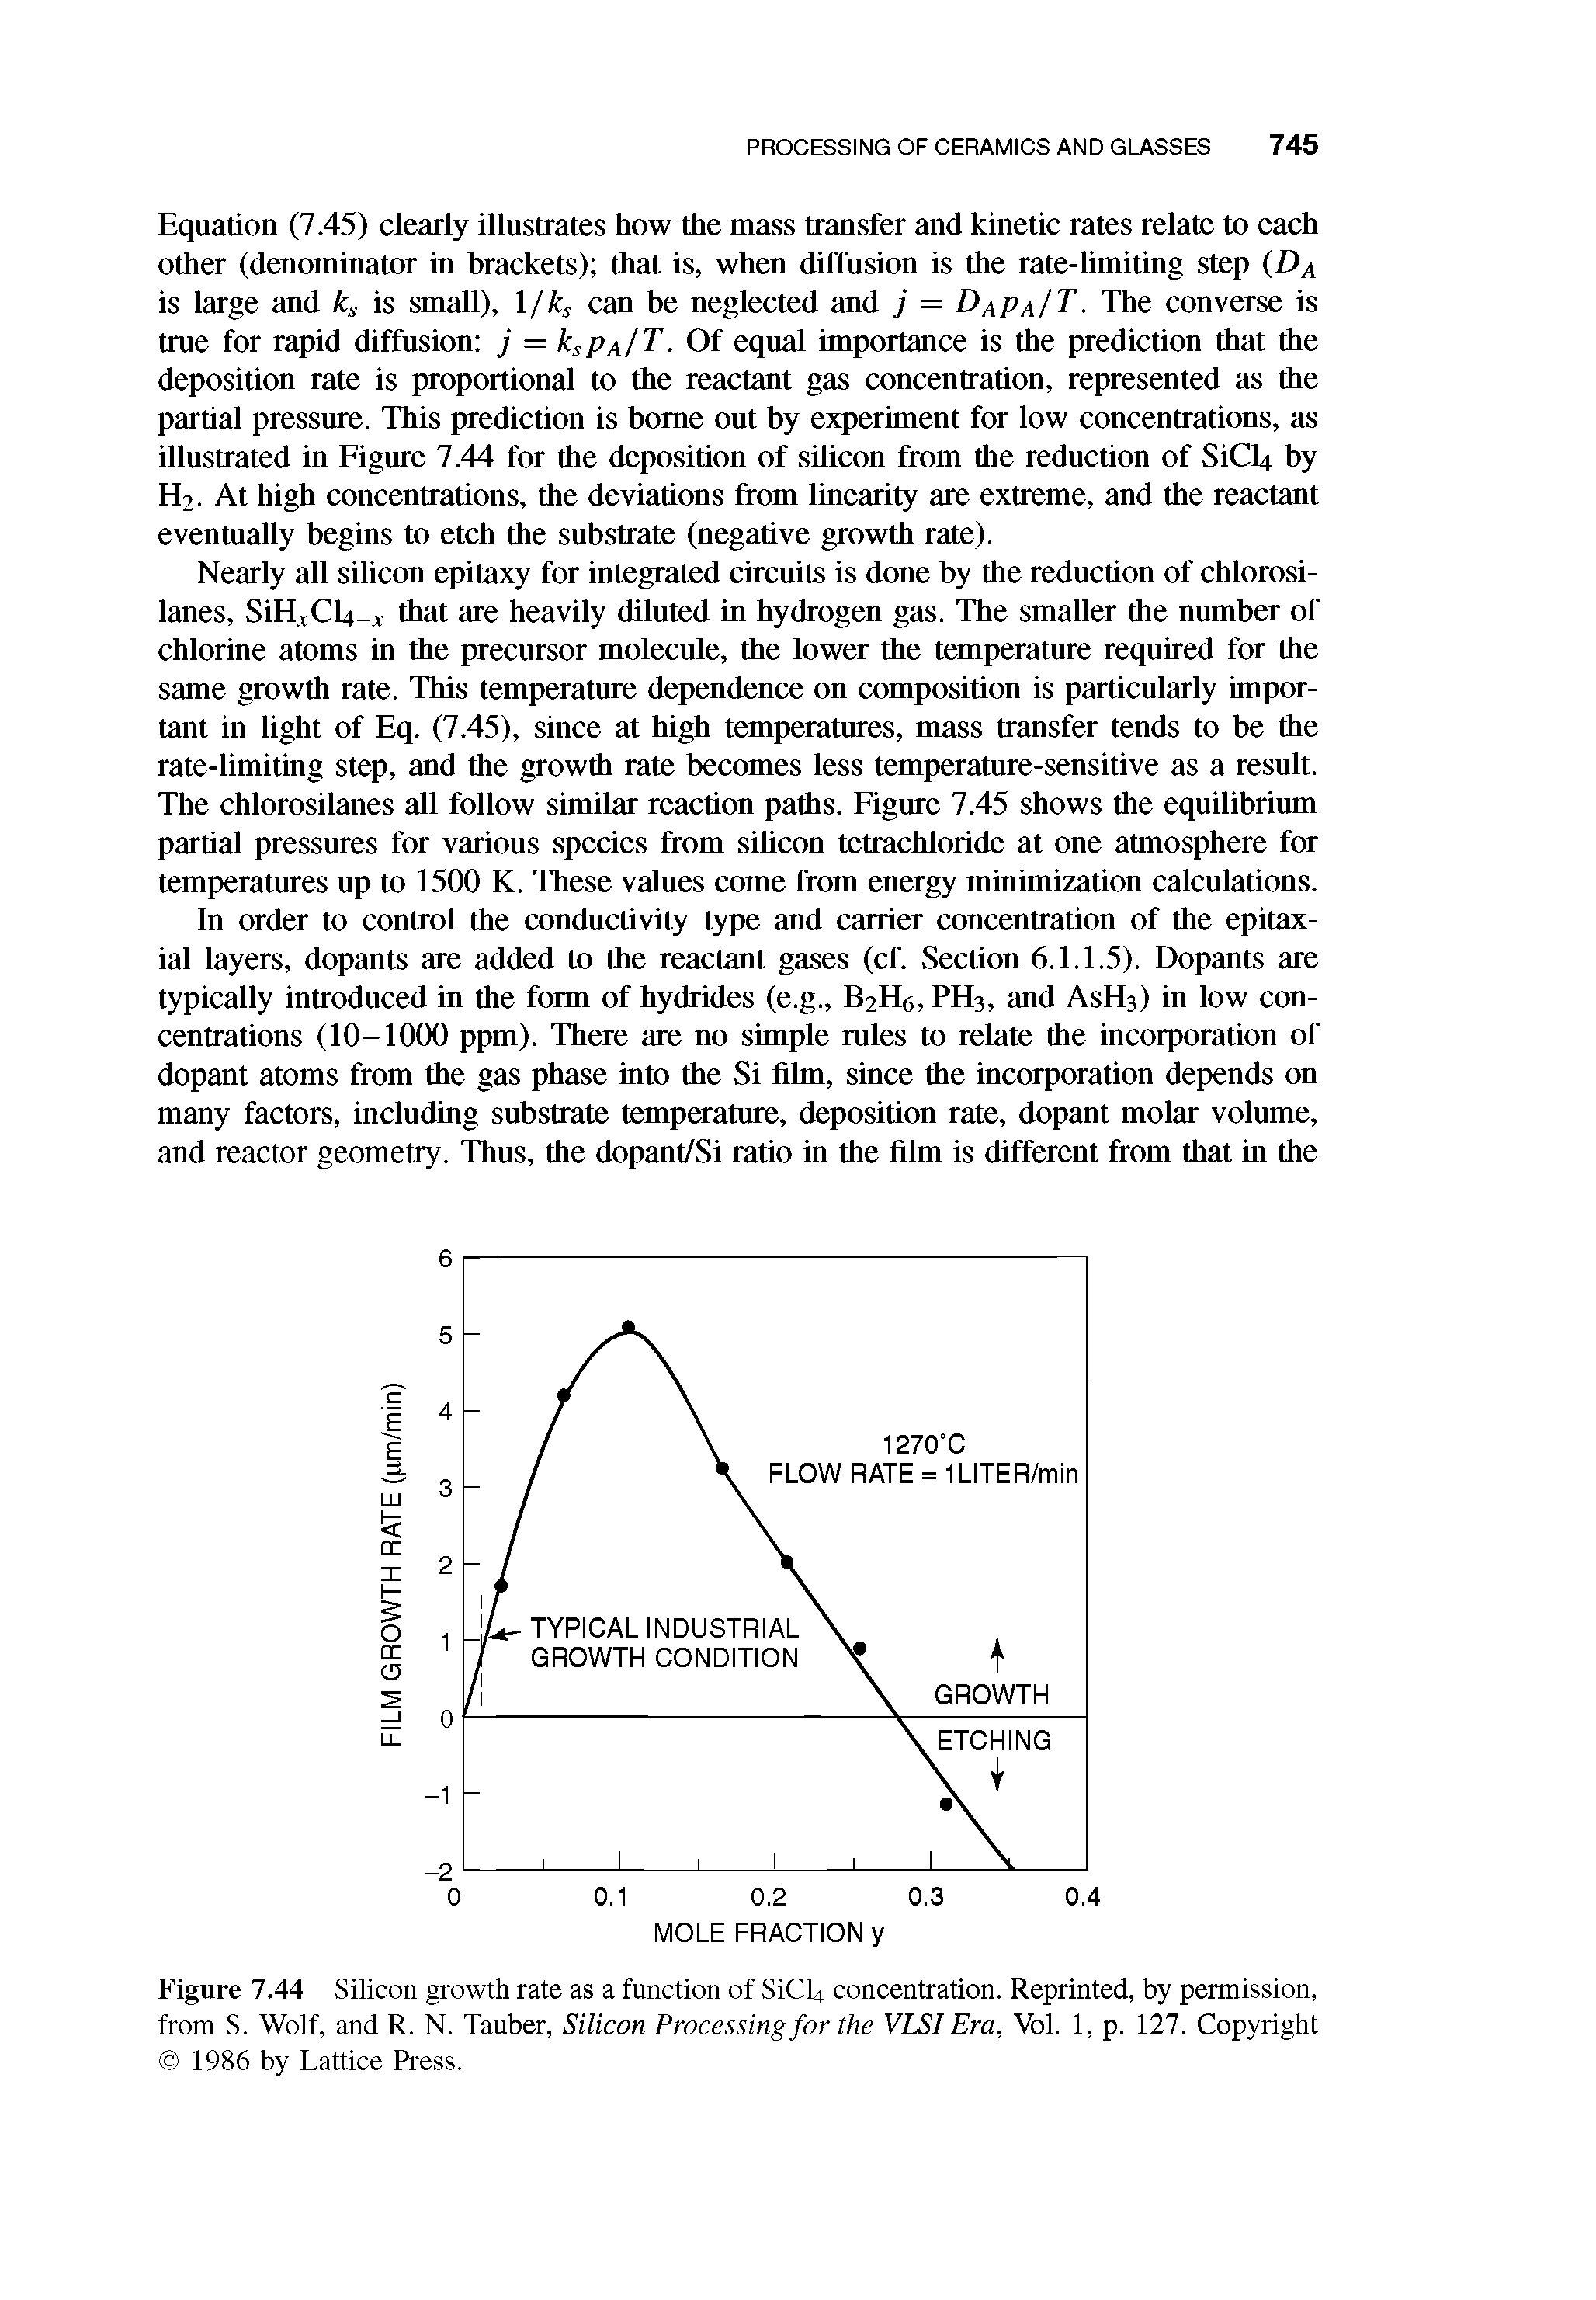 Figure 7.44 Silicon growth rate as a function of SiCLt concentration. Reprinted, by permission, from S. Wolf, and R. N. Tauber, Silicon Processing for the VLSI Era, Vol. 1, p. 127. Copyright 1986 by Lattice Press.